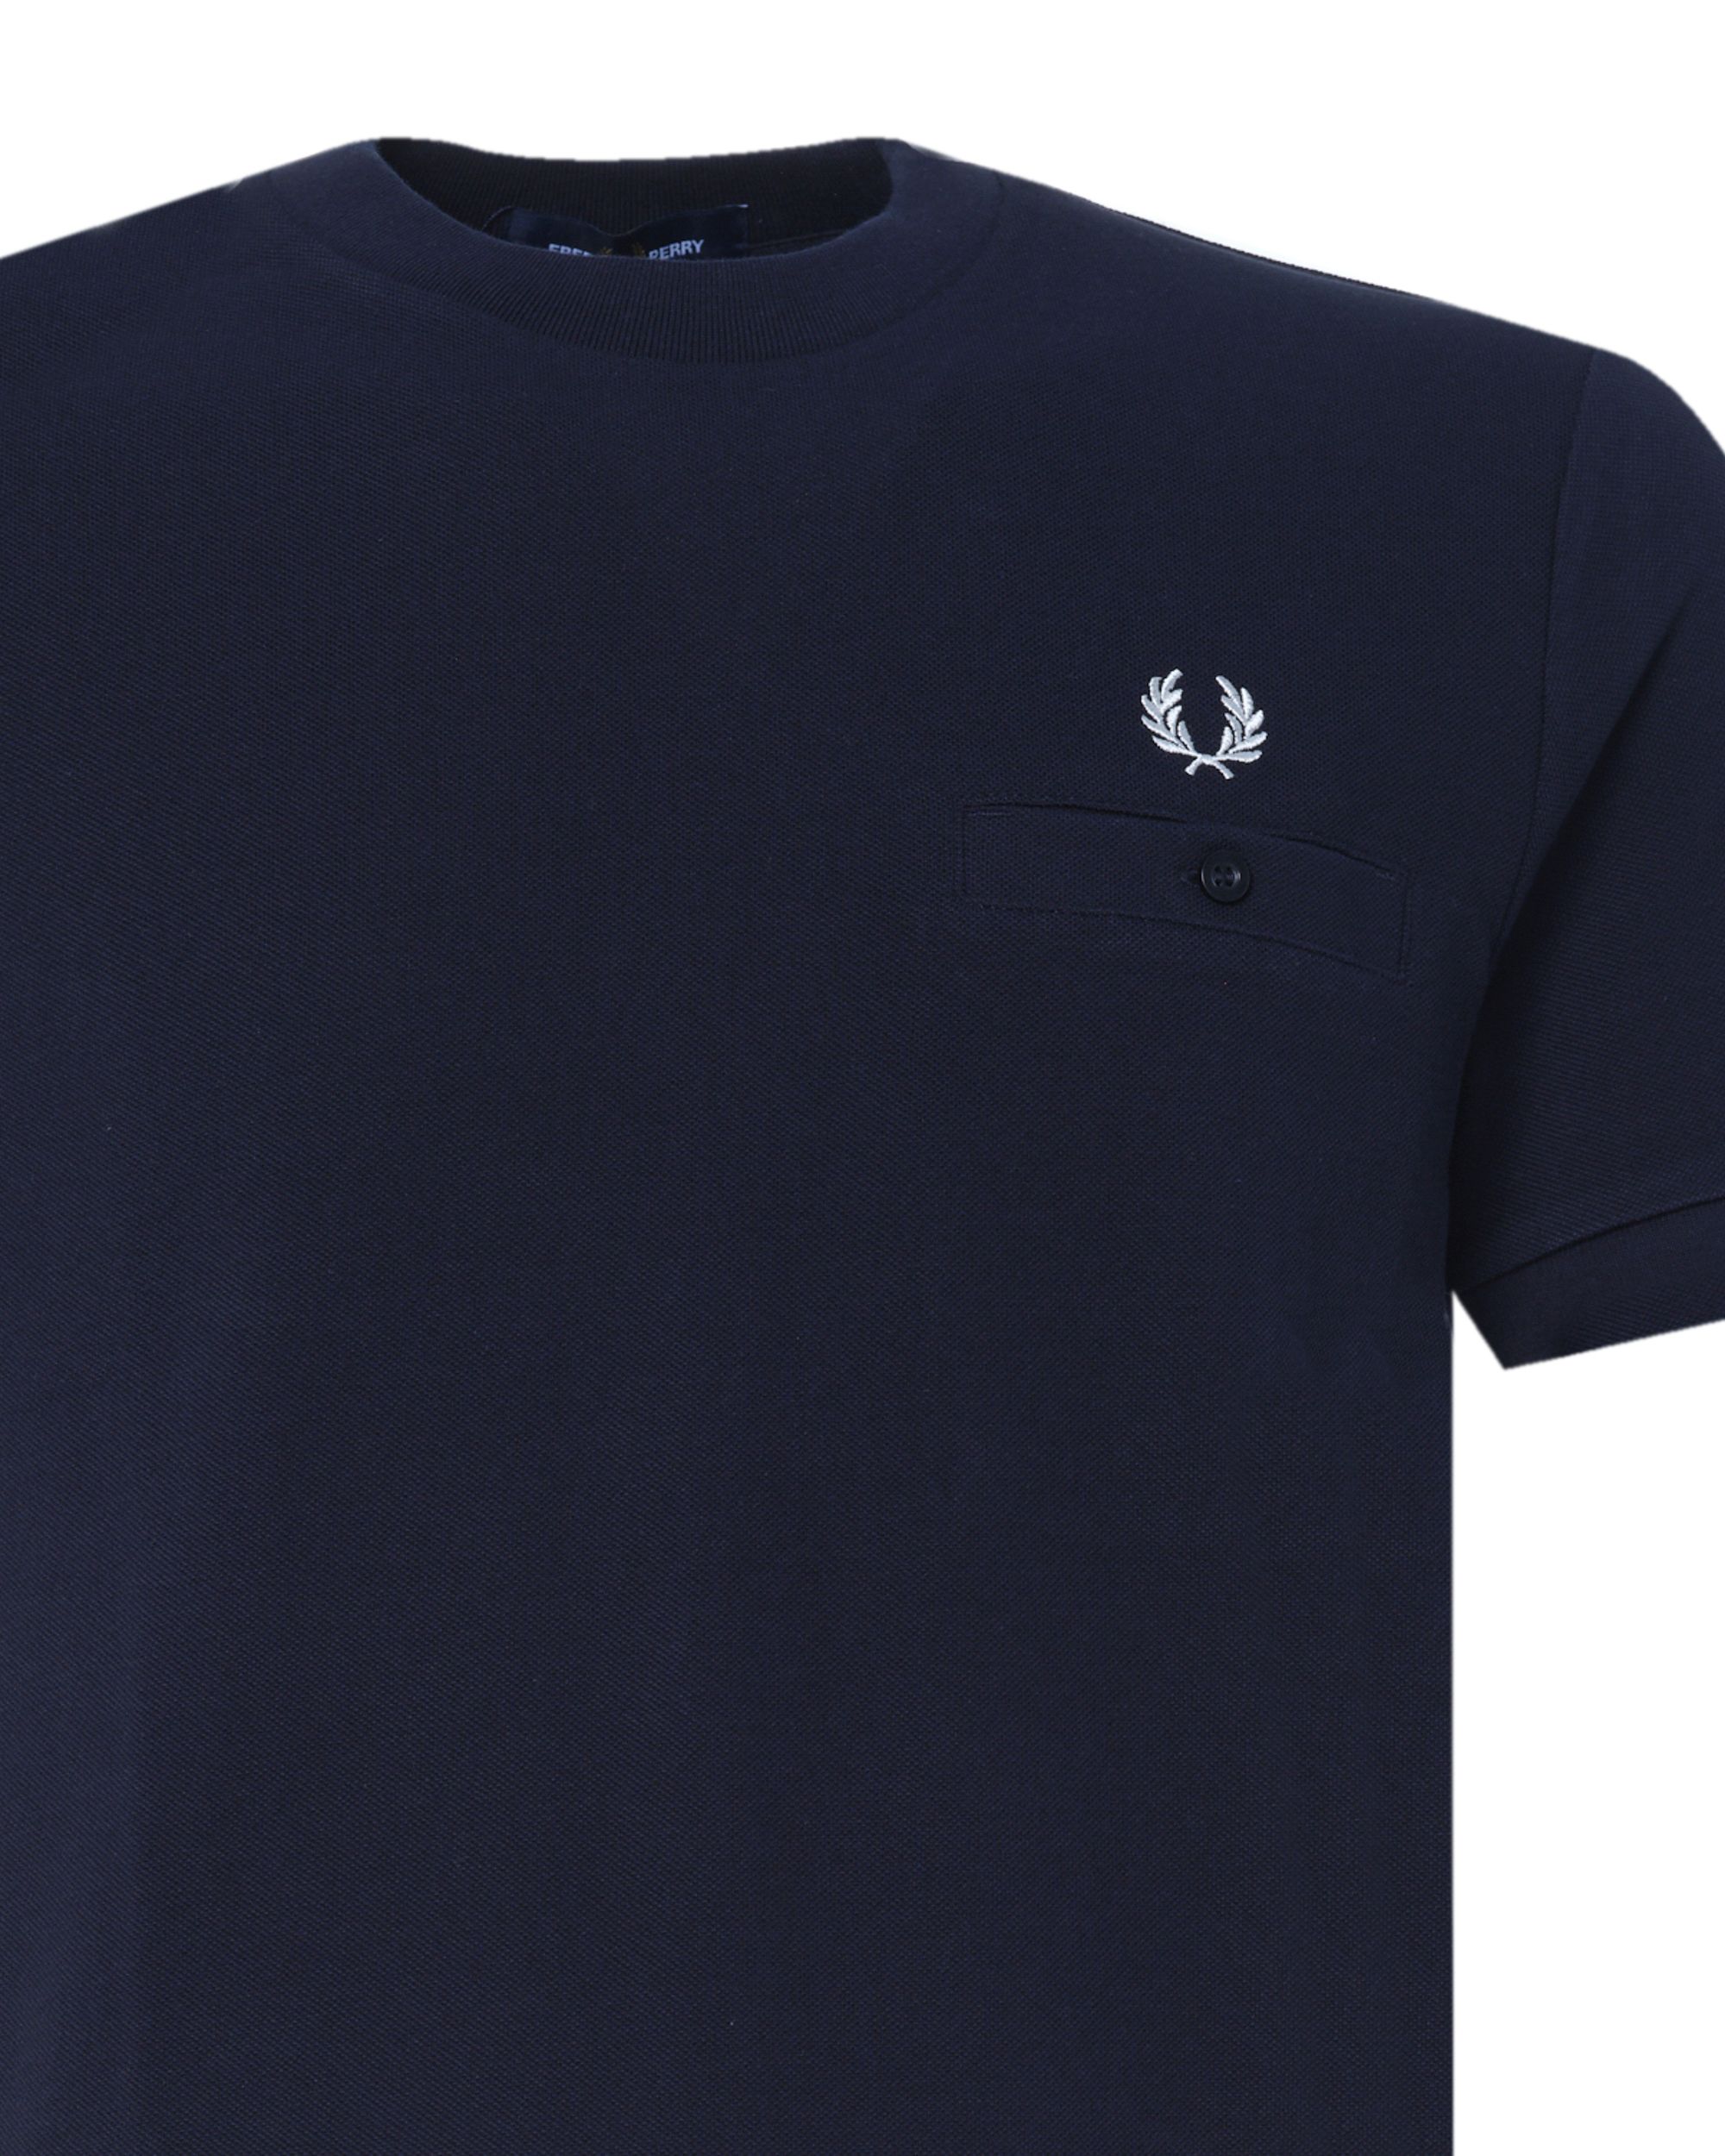 Fred Perry T-shirt KM Donker blauw 078796-002-M